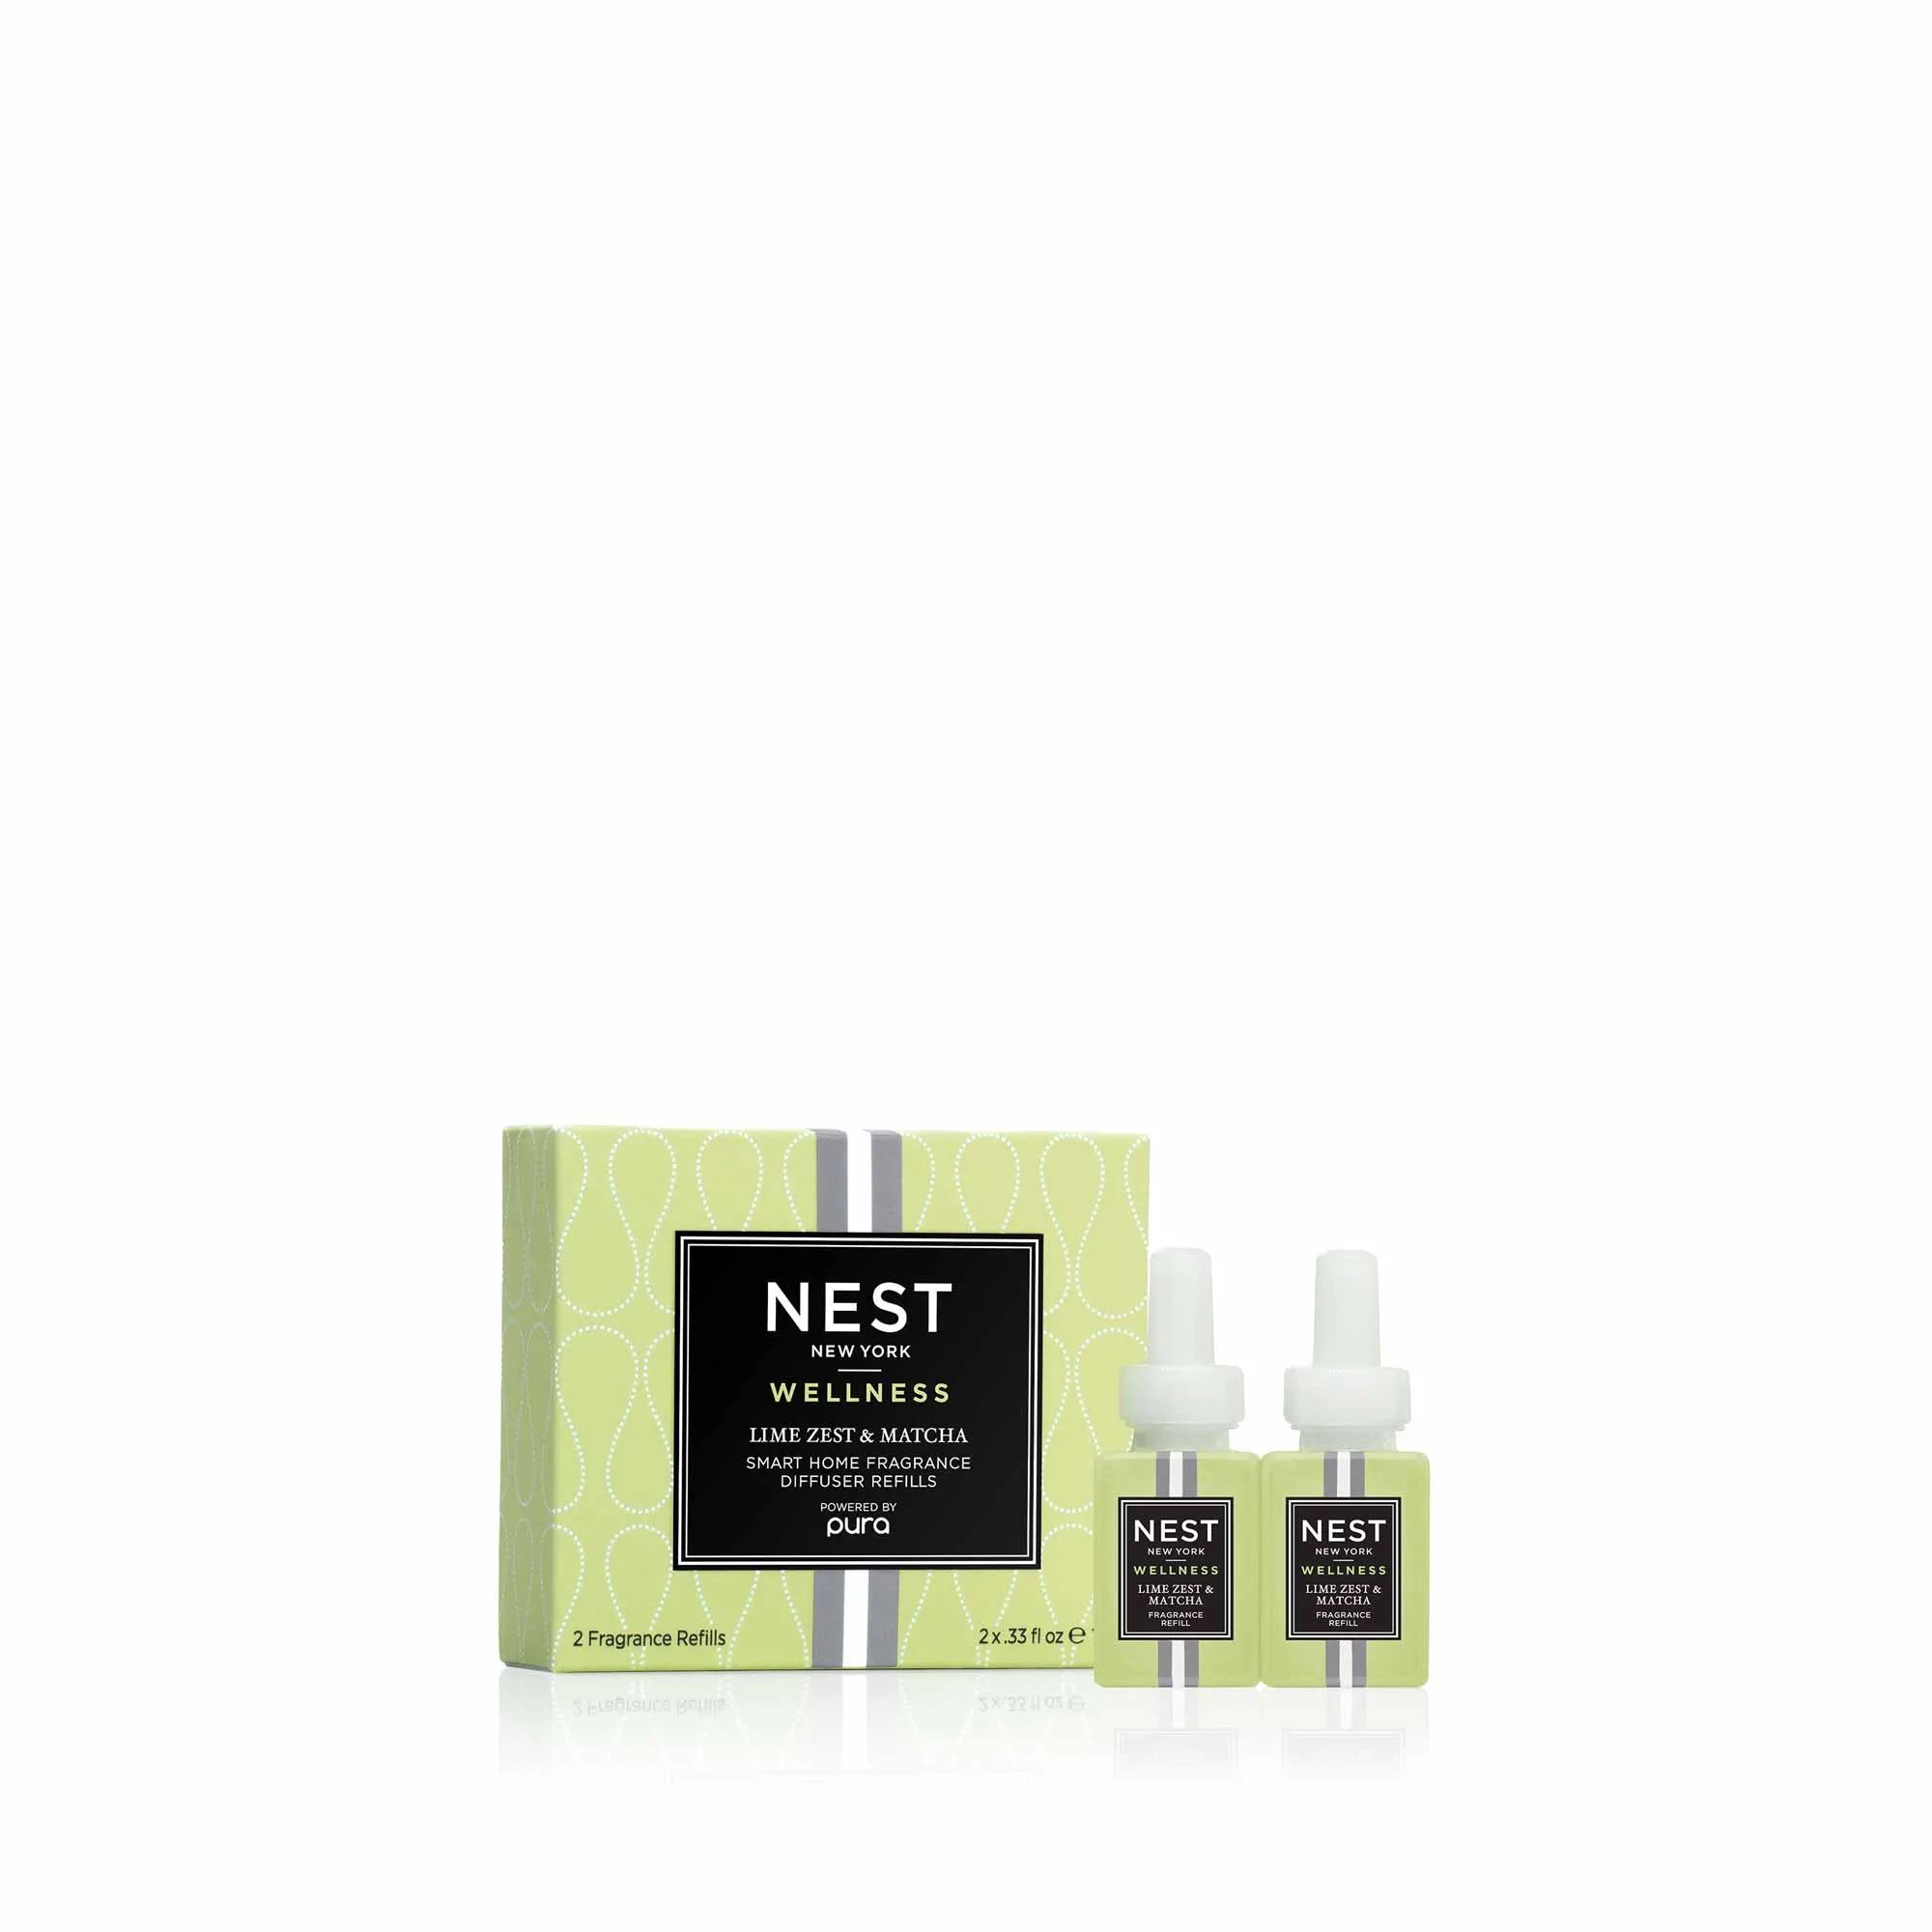 Lime Zest & Matcha Refill Duo for Pura Smart Home Fragrance Diffuser | NEST Fragrances